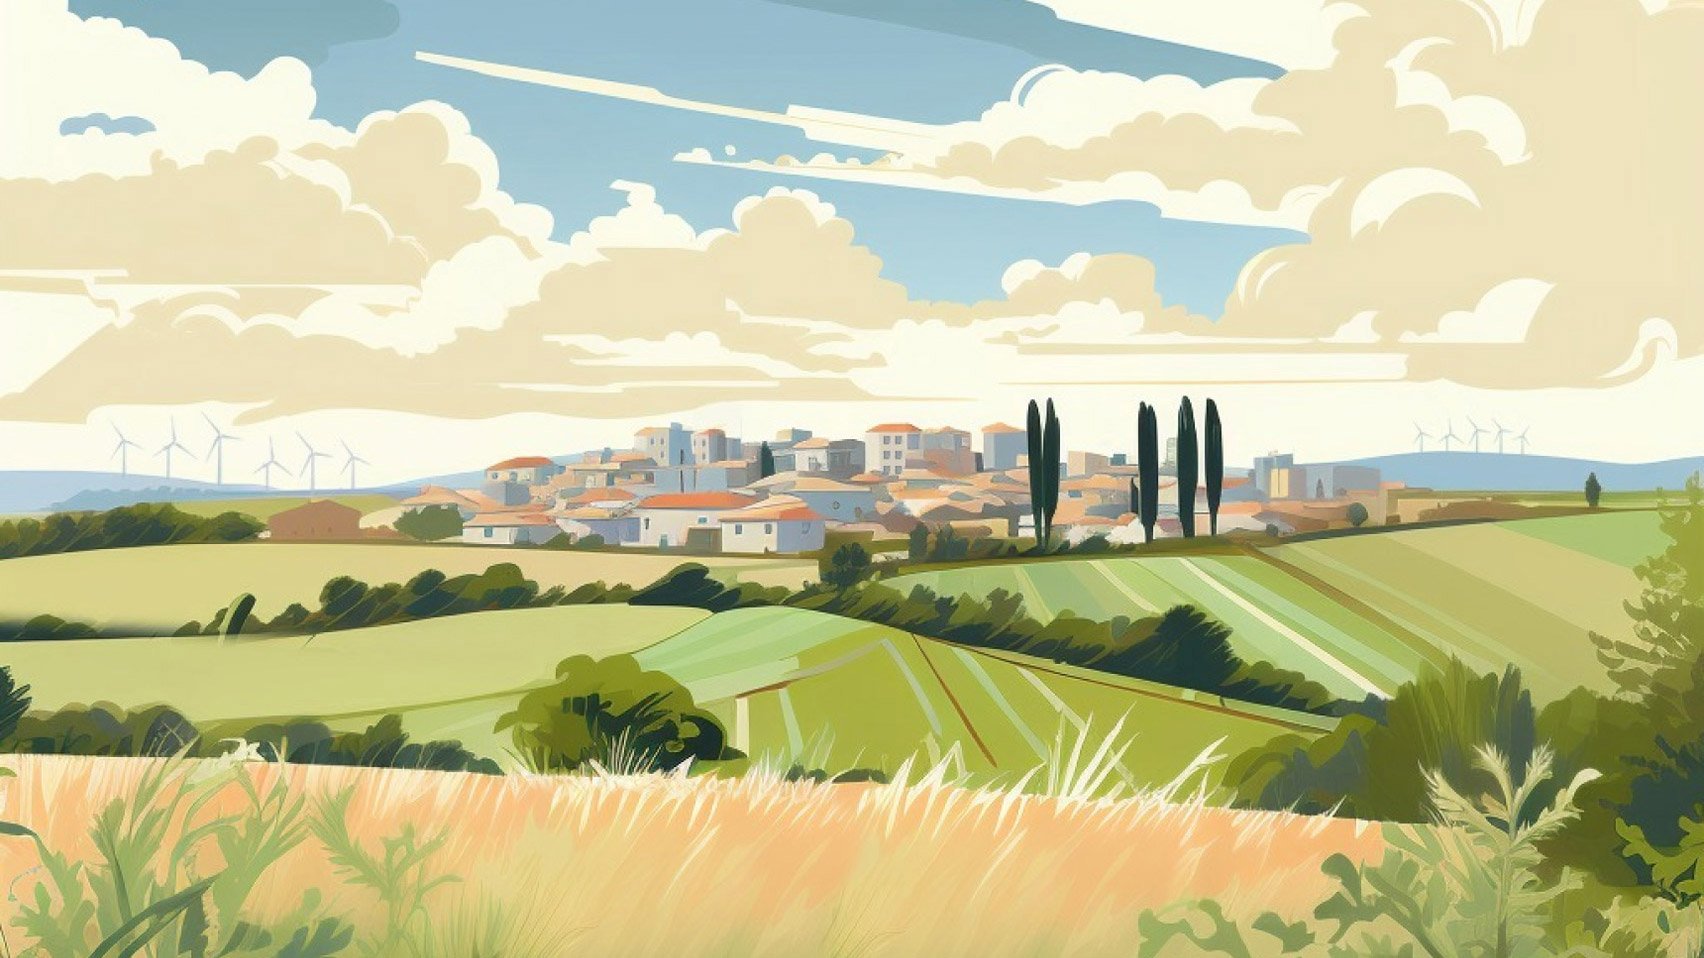 Illustration of Solano county city California Forever by Flannery Associates